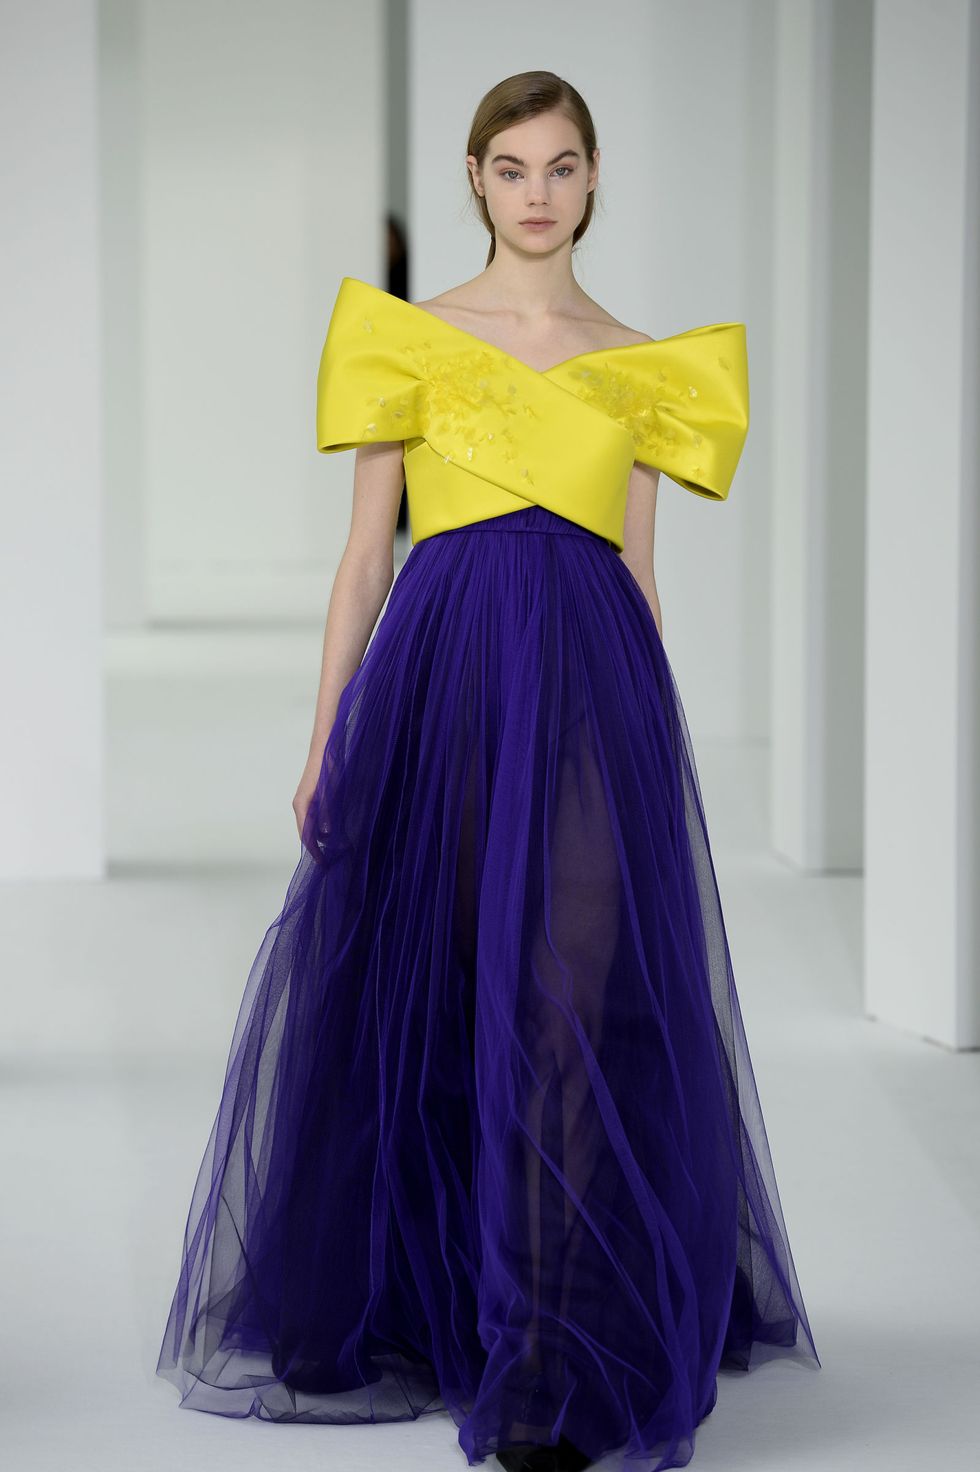 <p>You'll have your pick of poppy colors this year (your fave), but may we recommend a yellow? Or a marigold, maybe? Delpozo's got the right idea pairing a crossover bodice with a complementary violet.&nbsp;</p>